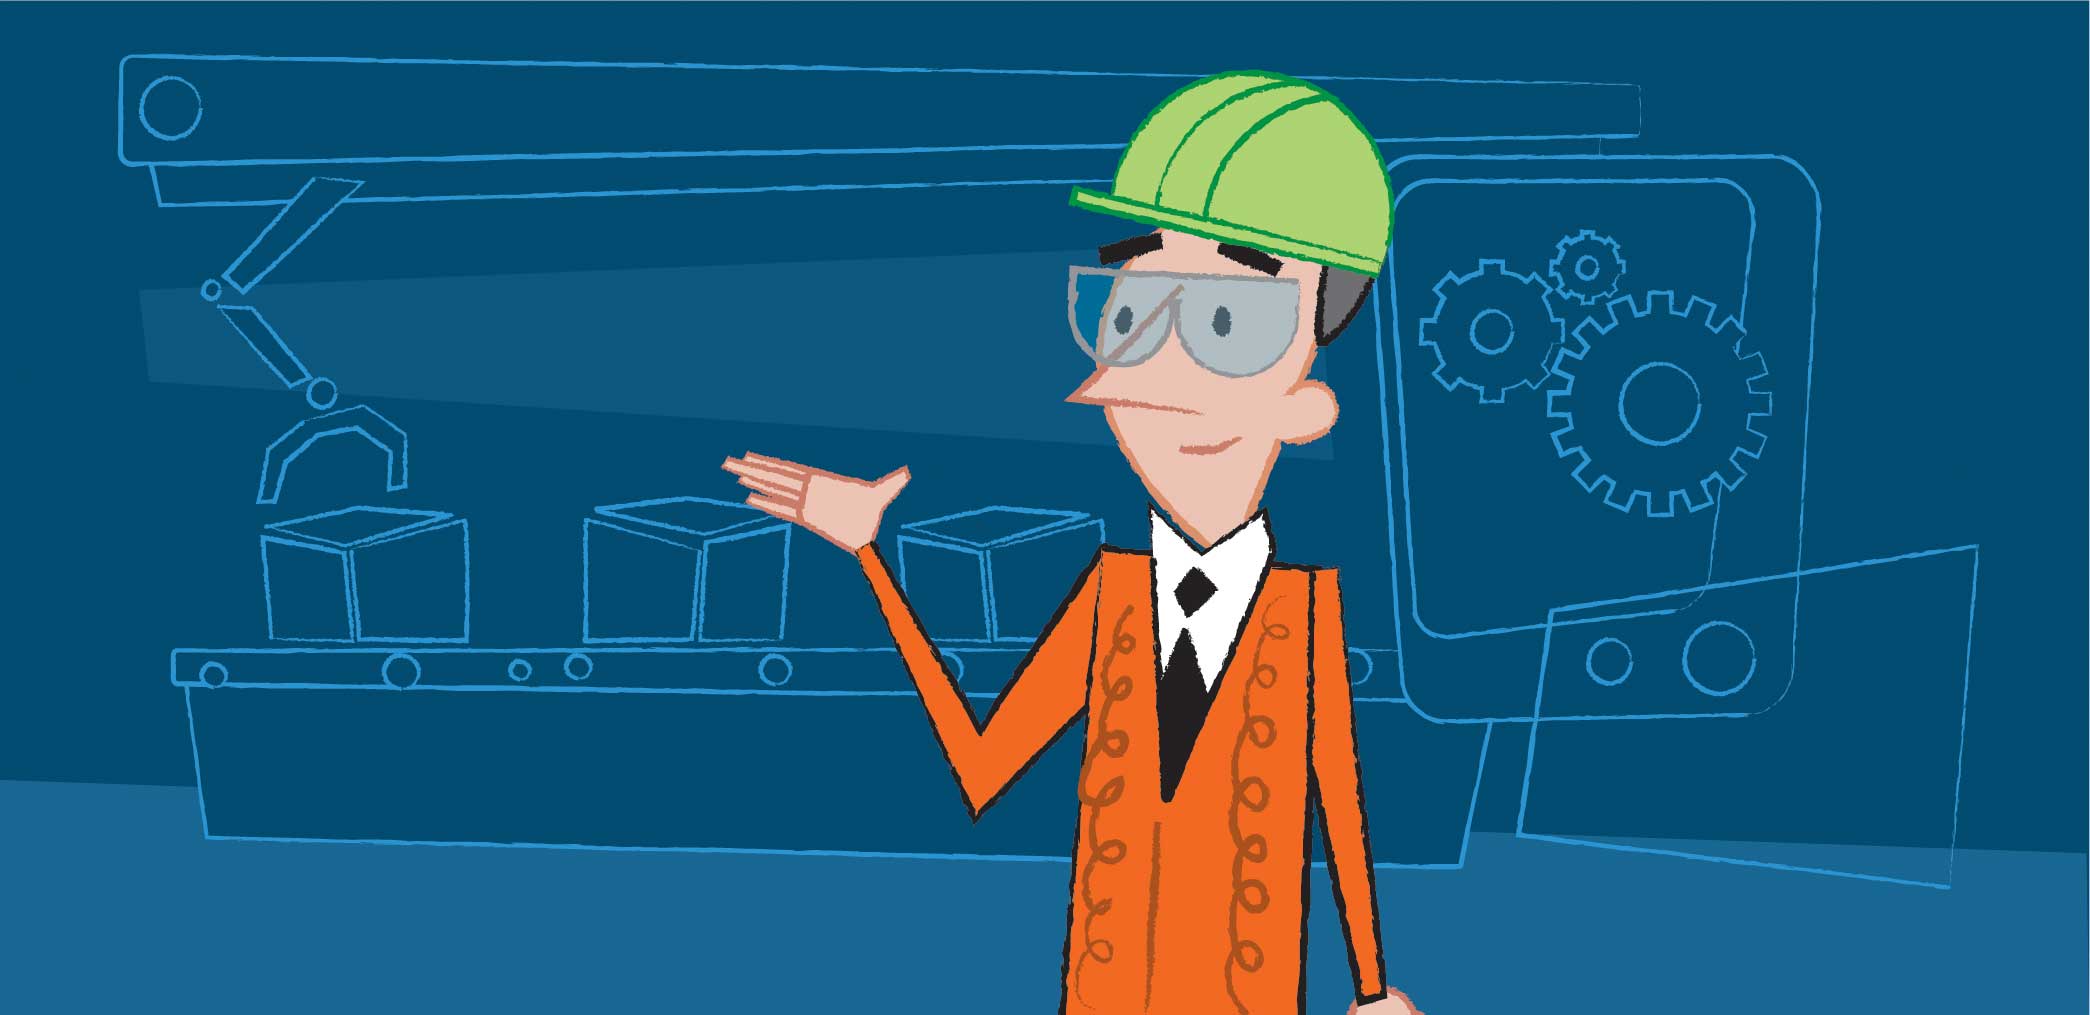 Animate man with green hard hat in orange suit.